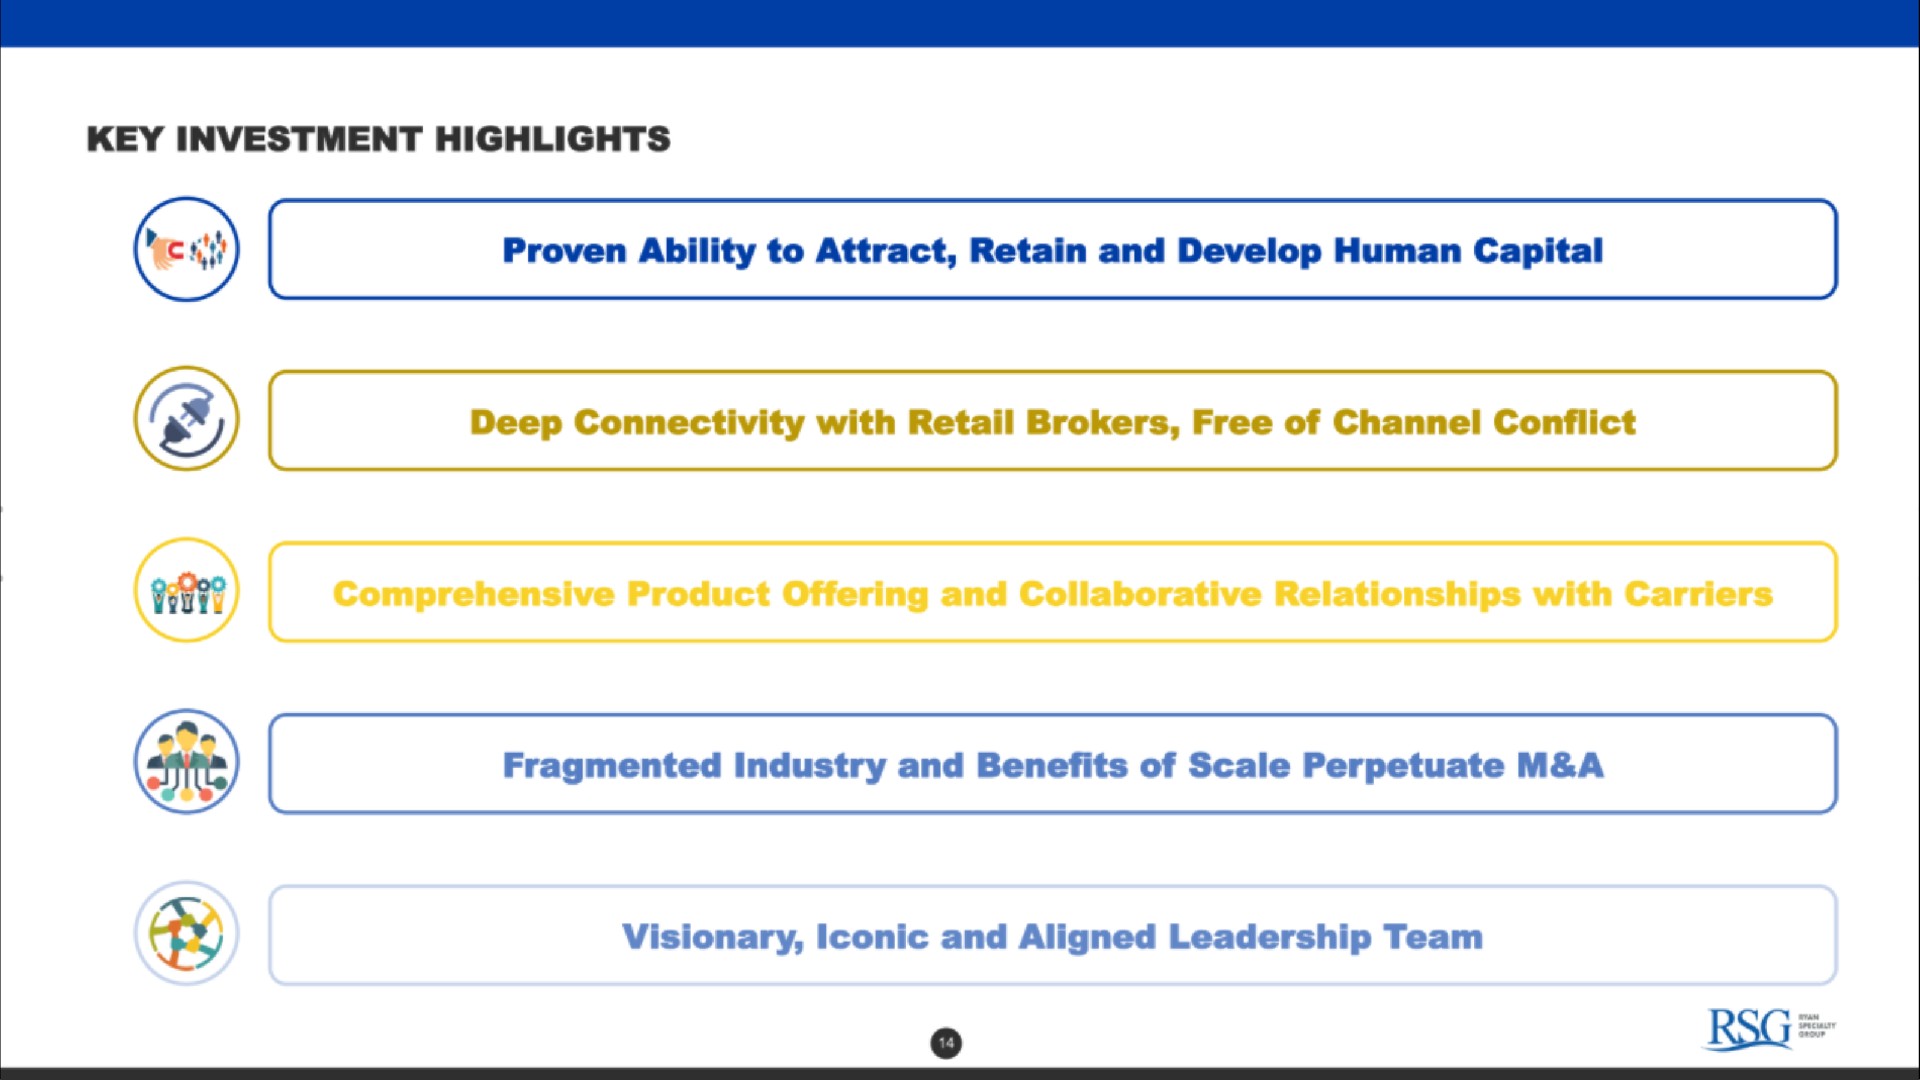 key investment highlights proven ability to attract retain and develop human capital deep connectivity with retail brokers free of channel conflict fragmented industry and benefits of scale perpetuate a visionary iconic and aligned leadership team | Rayan Speciality Group